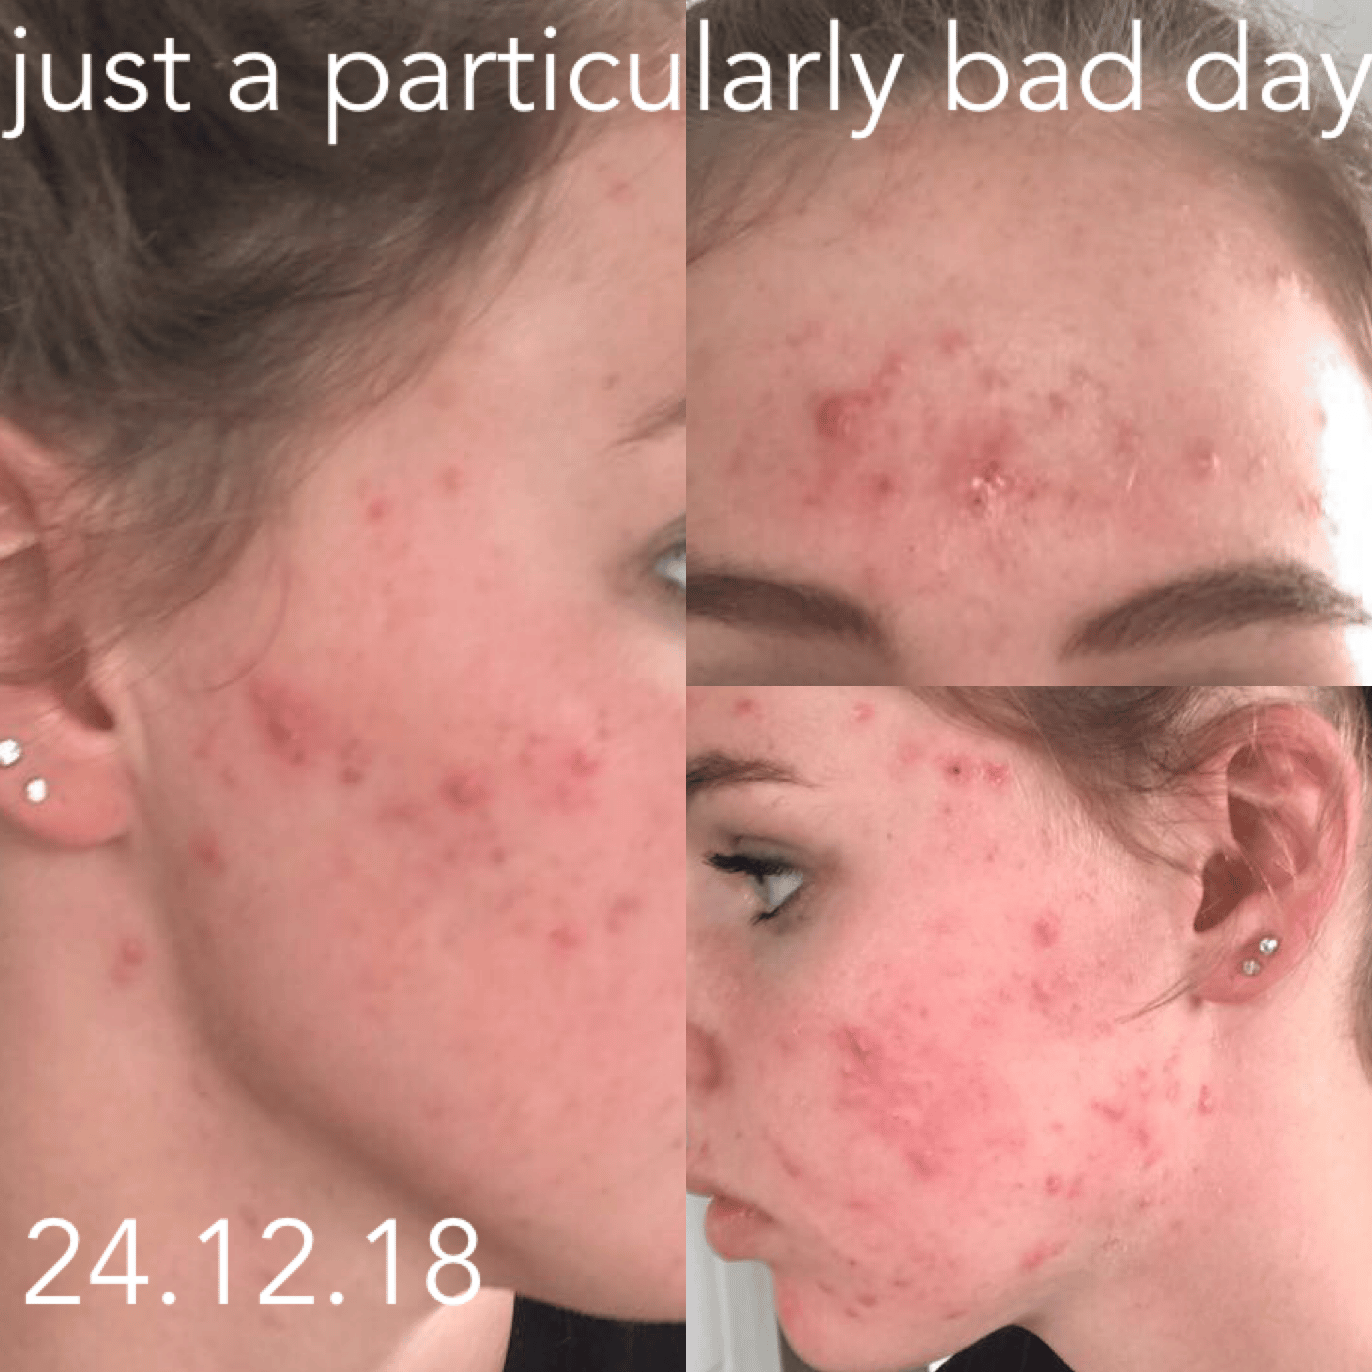 hormonal cystic acne sufferer